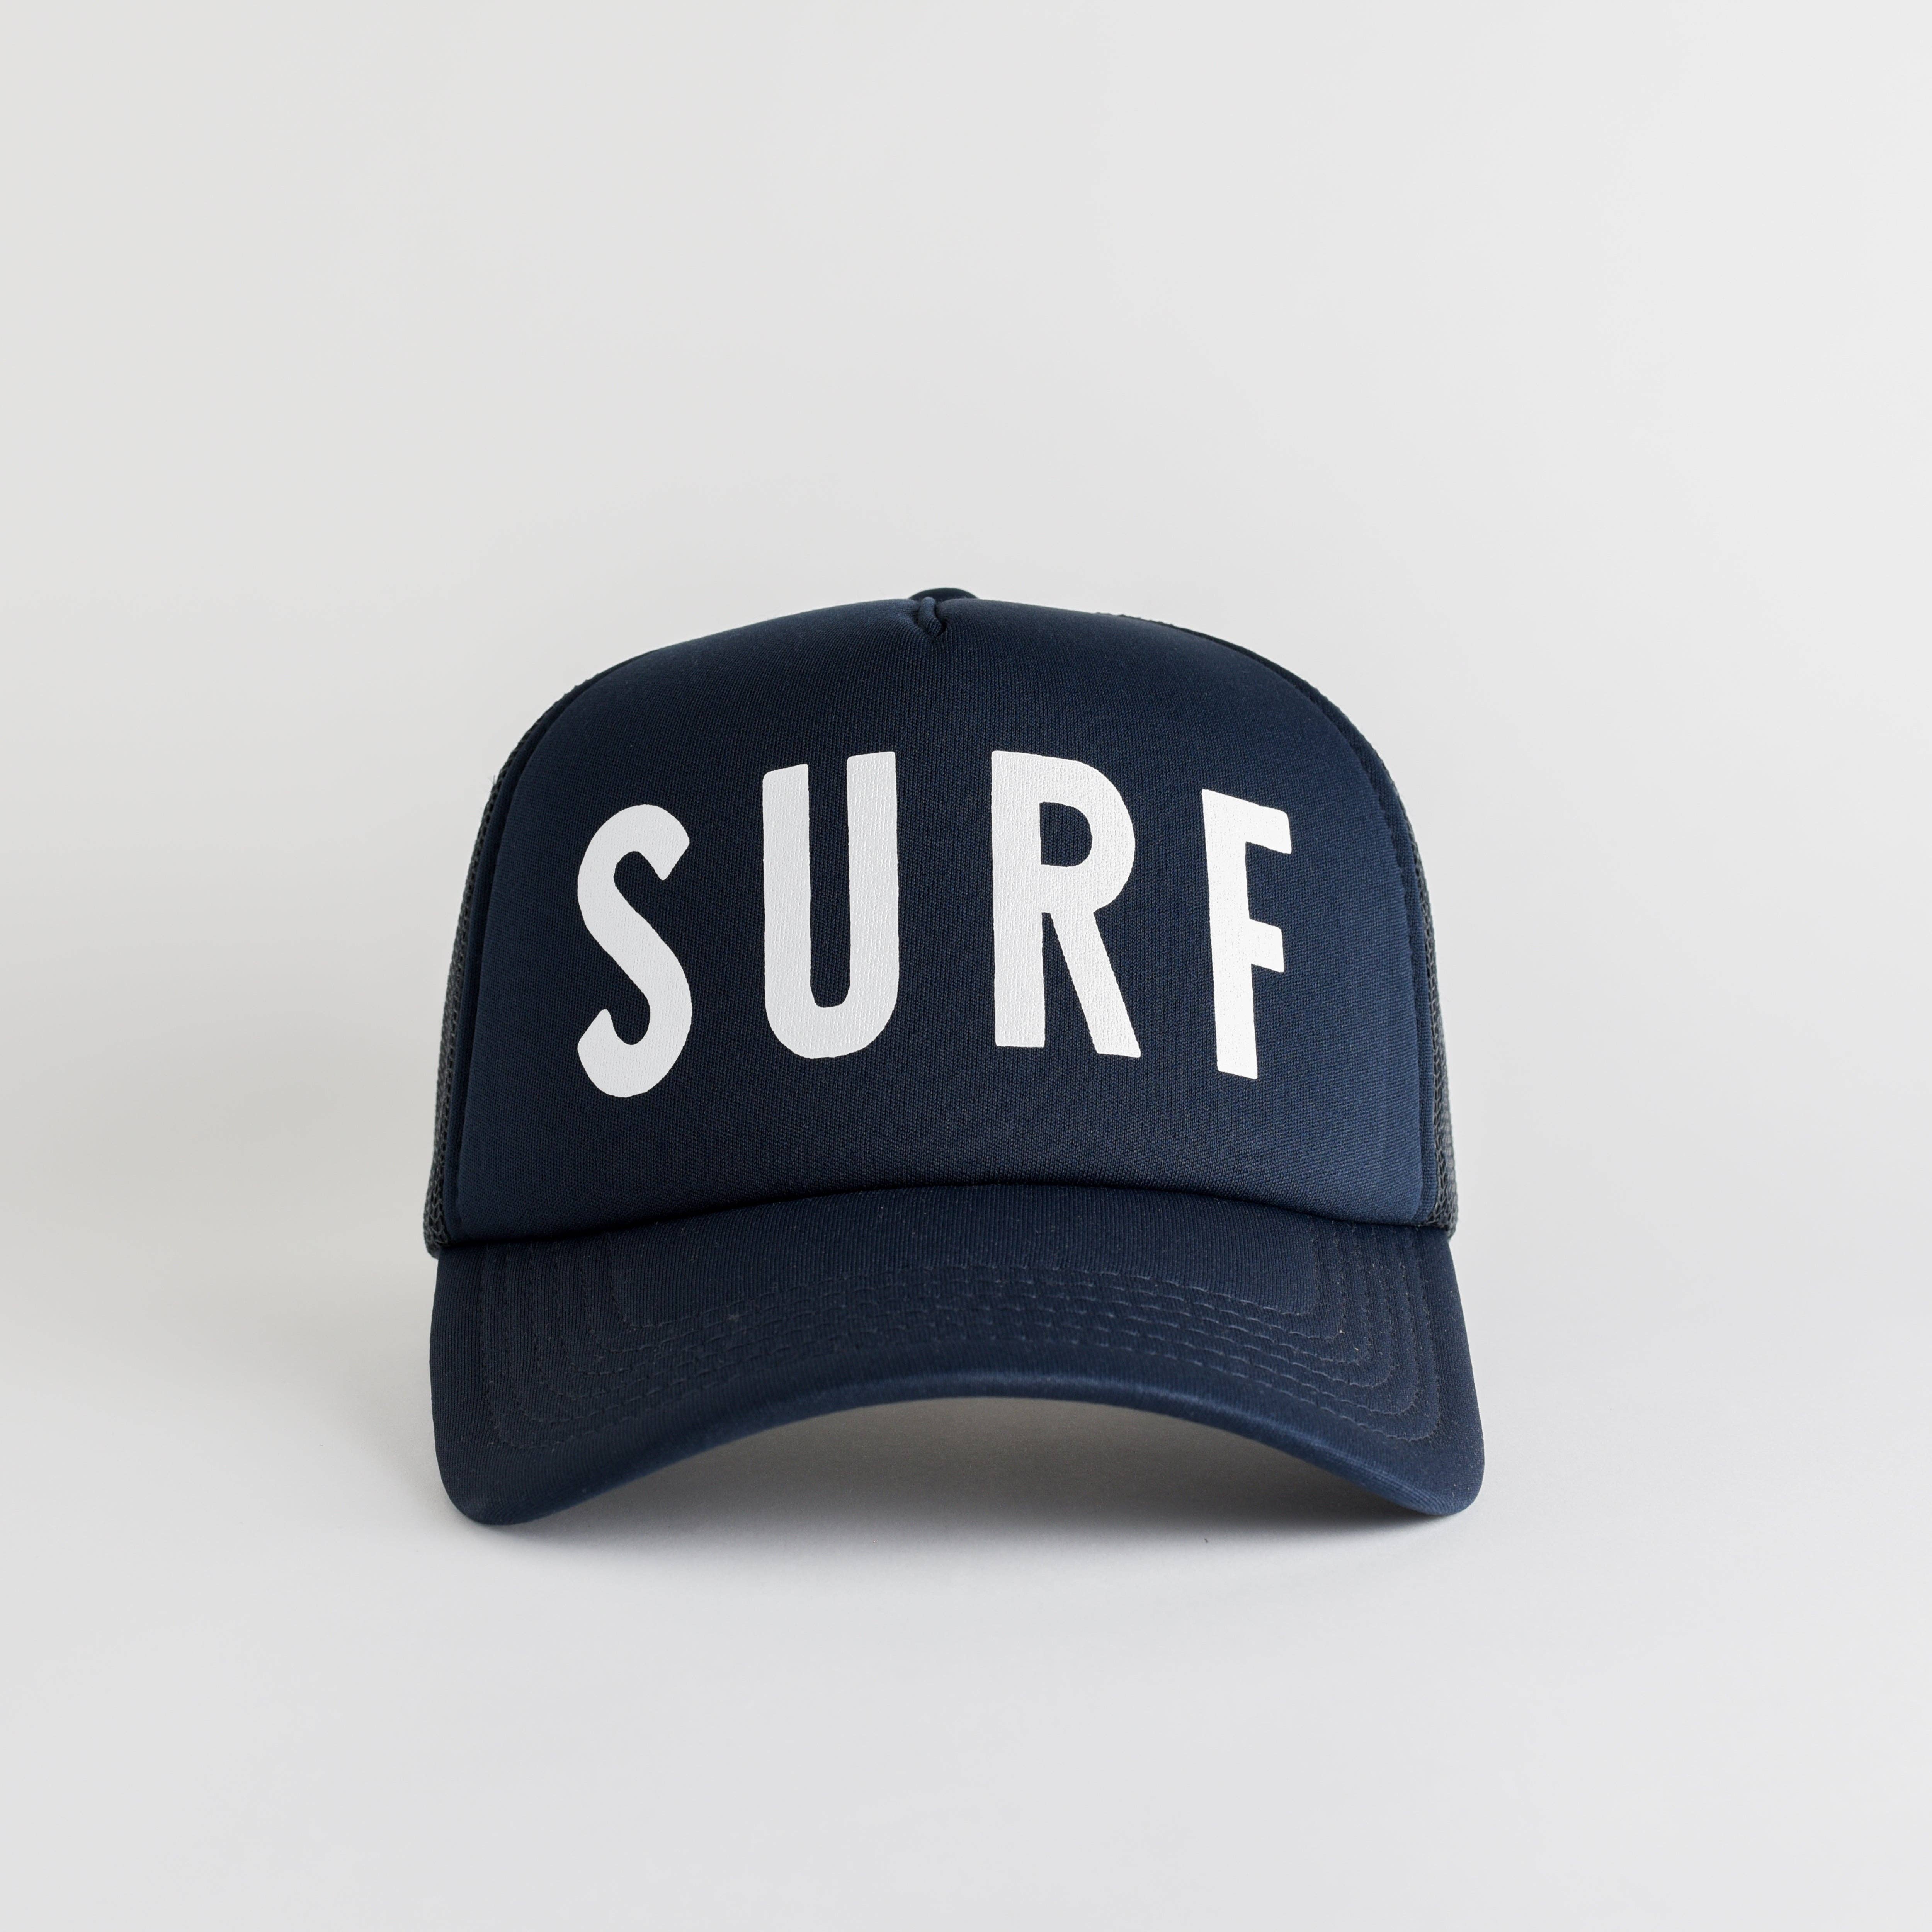 Purchase Wholesale surf hats. Free Returns & Net 60 Terms on Faire